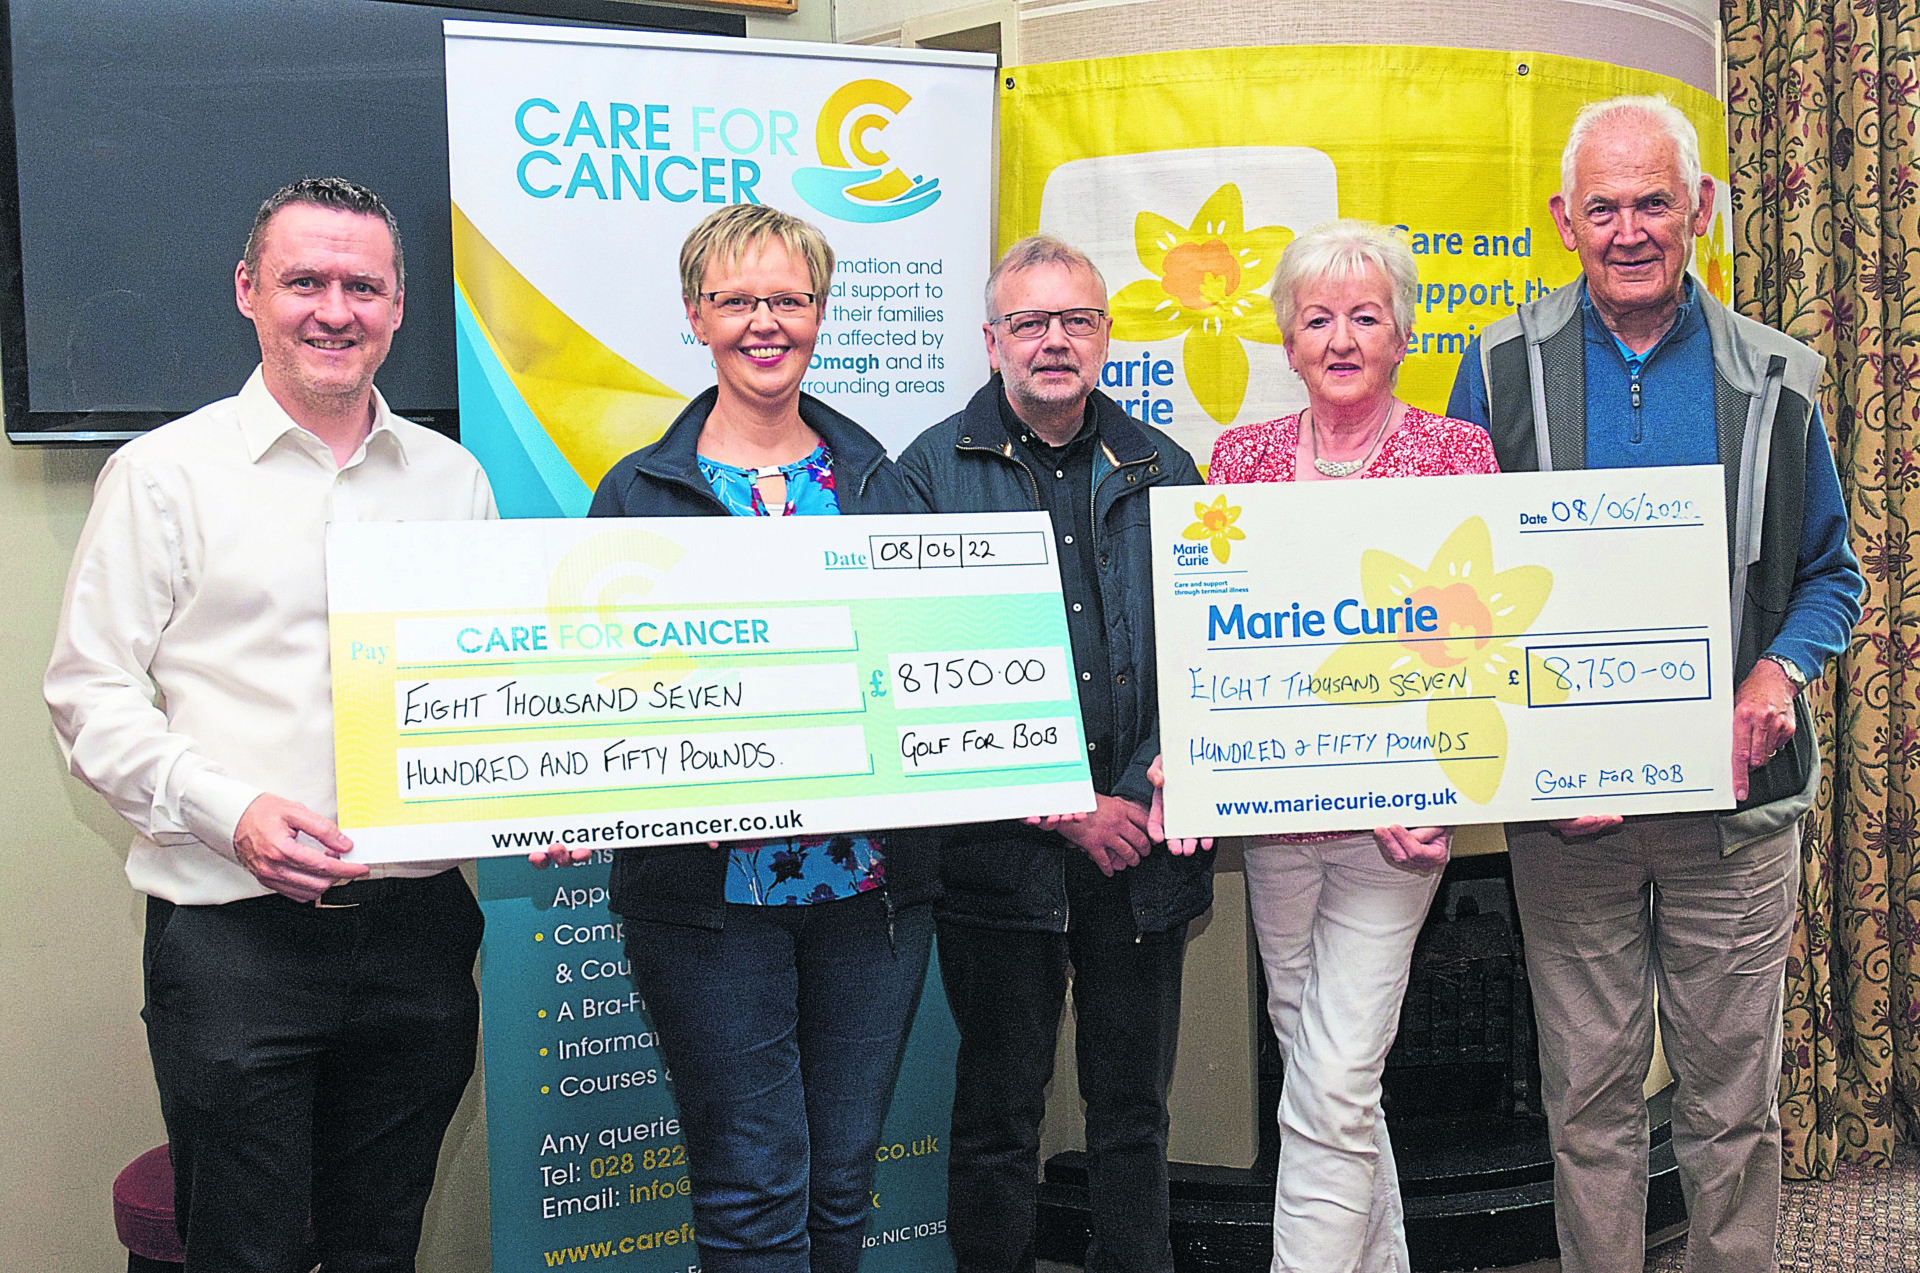 £17,500 raised in memory of Bob at golf event